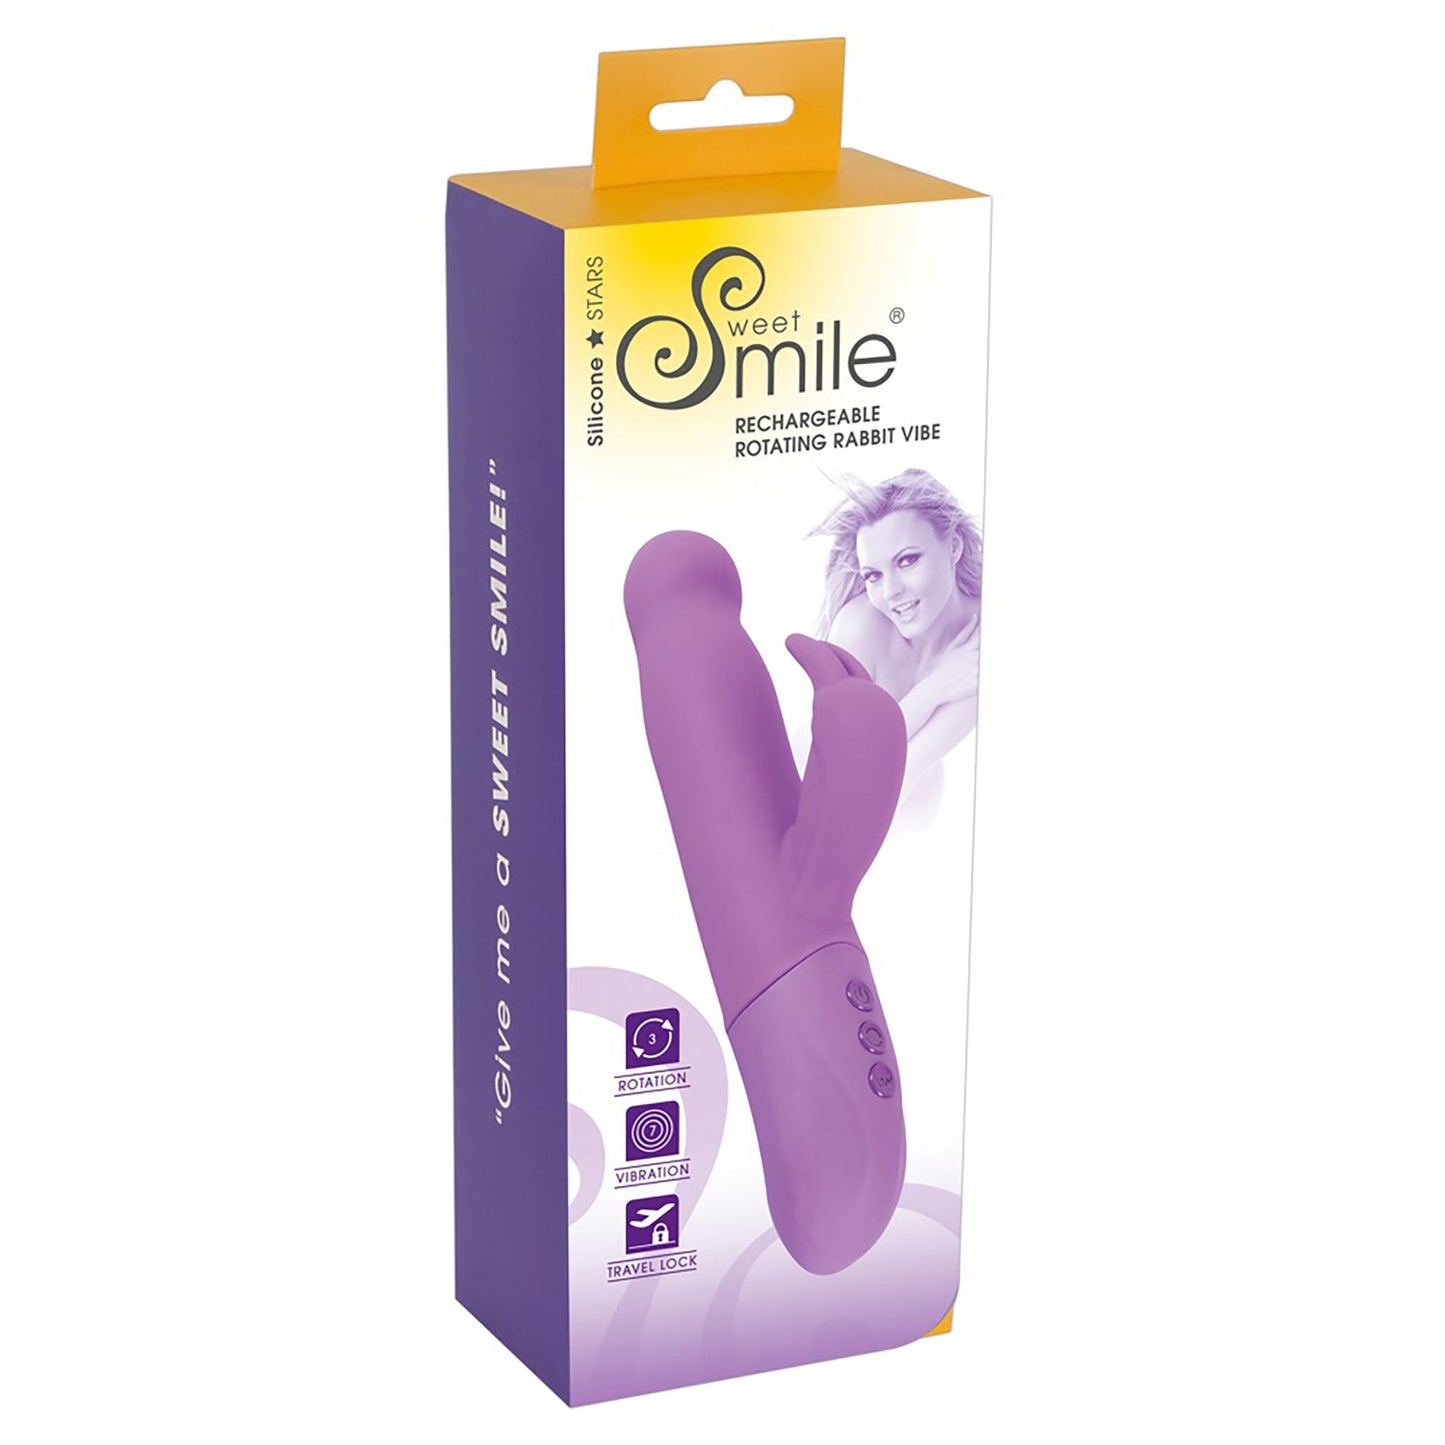 Rechargeable Rotating Rabbitvibrator in lila in Verpackung